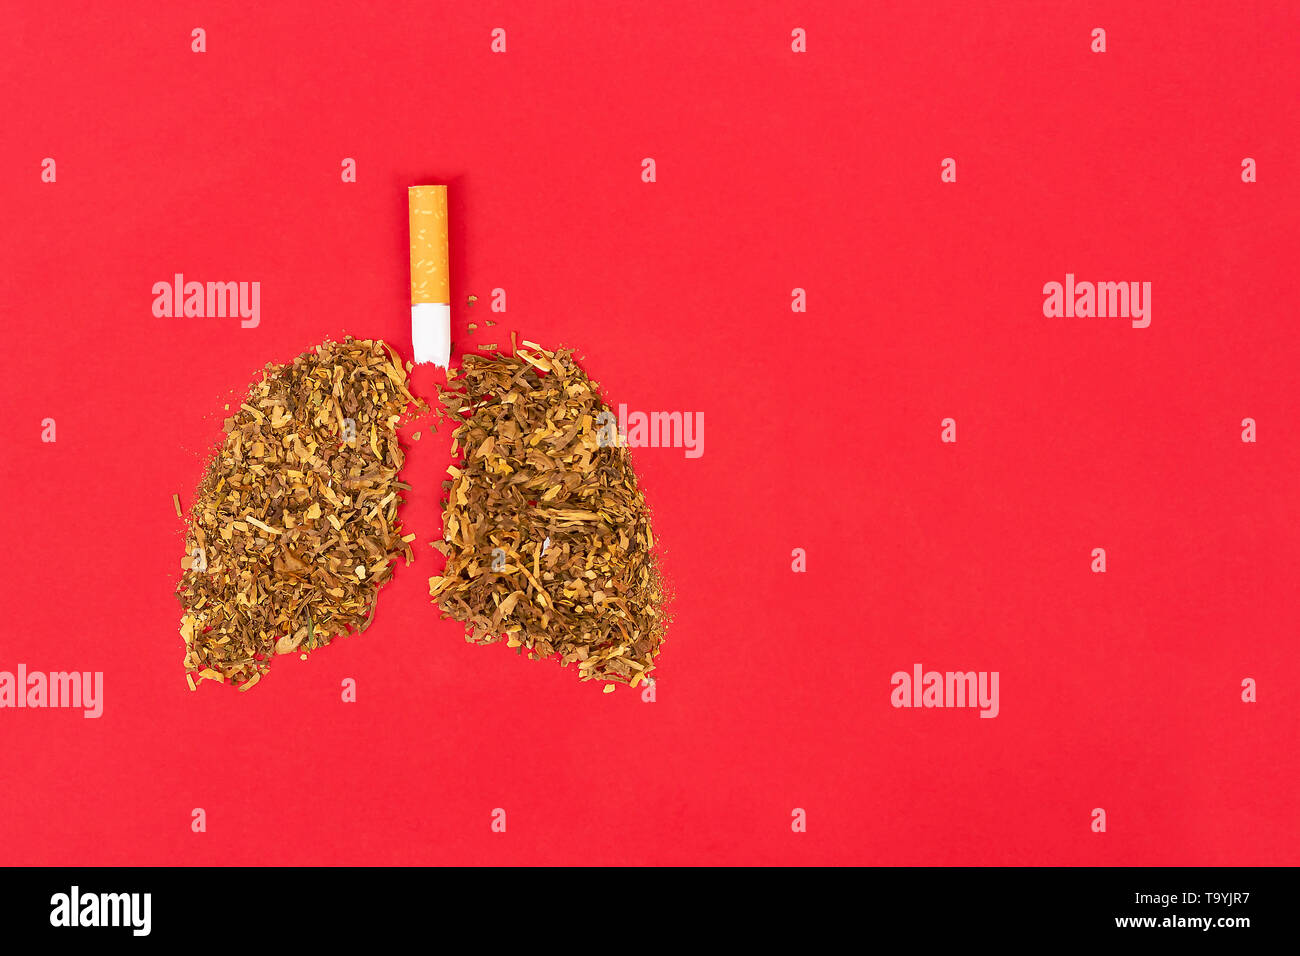 Lungs are made from tobacco and a cigarette is on a red background. Copy space. Stock Photo